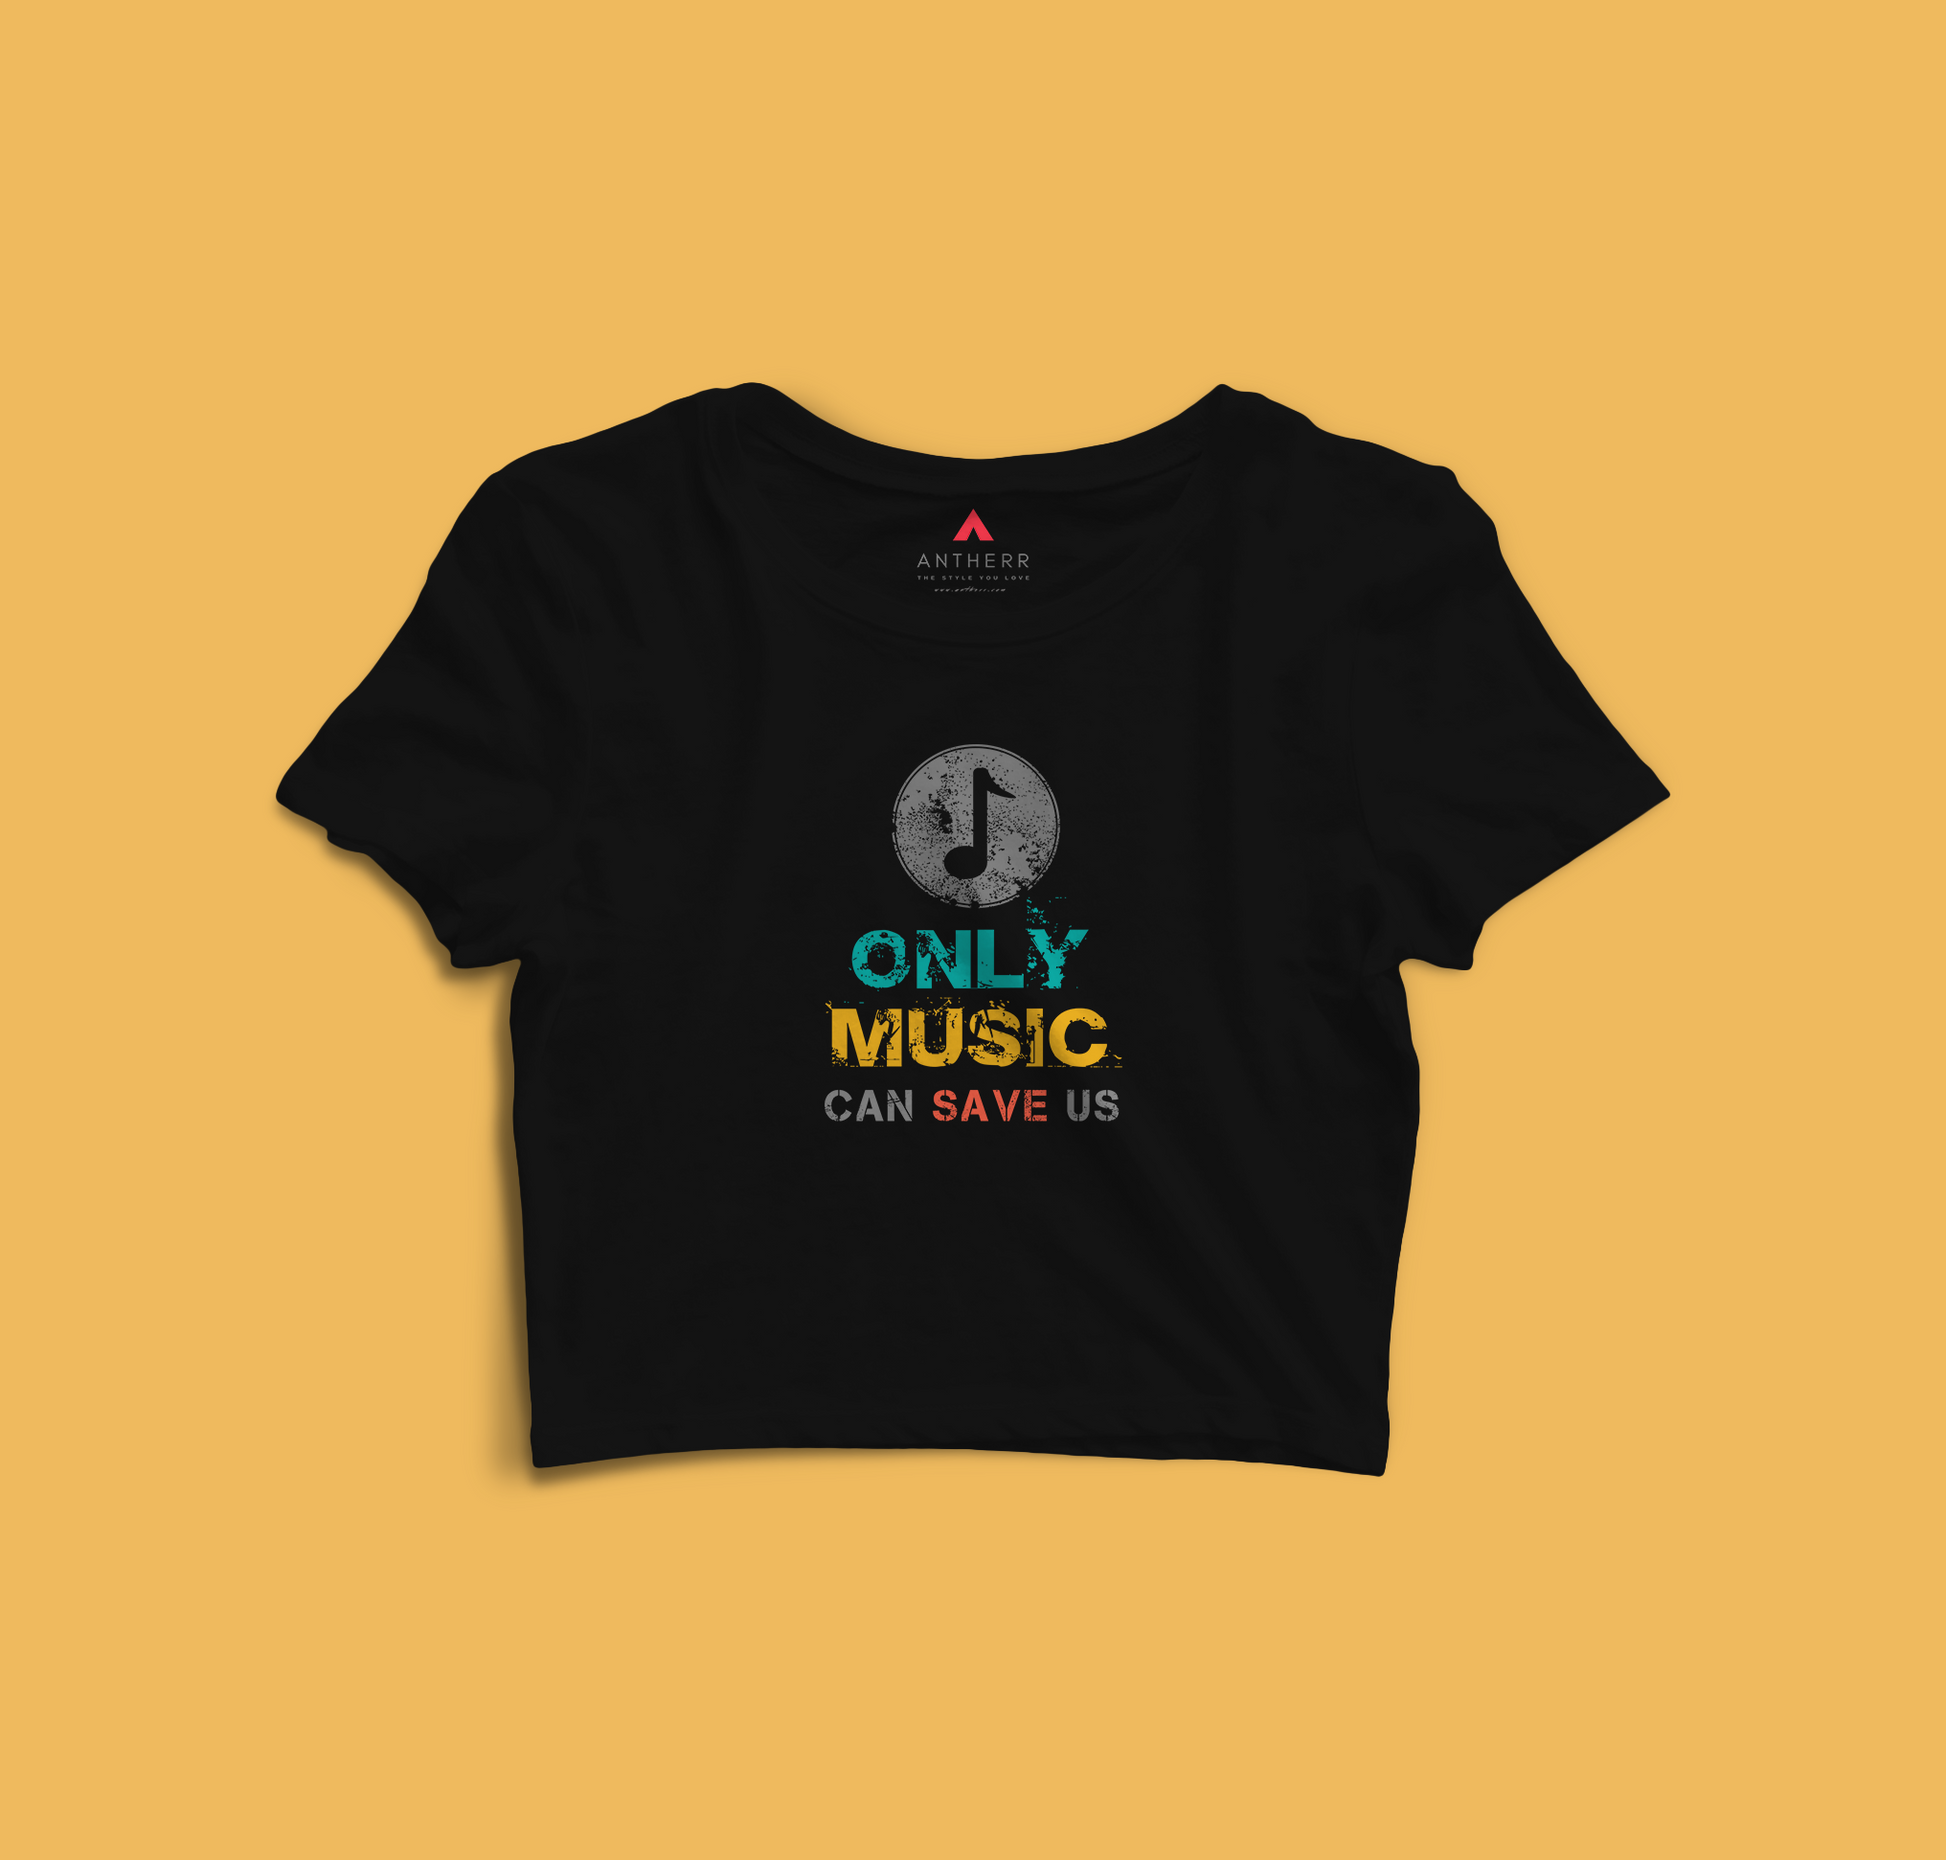 "ONLY MUSIC CAN SAVE US" - HALF-SLEEVE CROP TOP BLACK